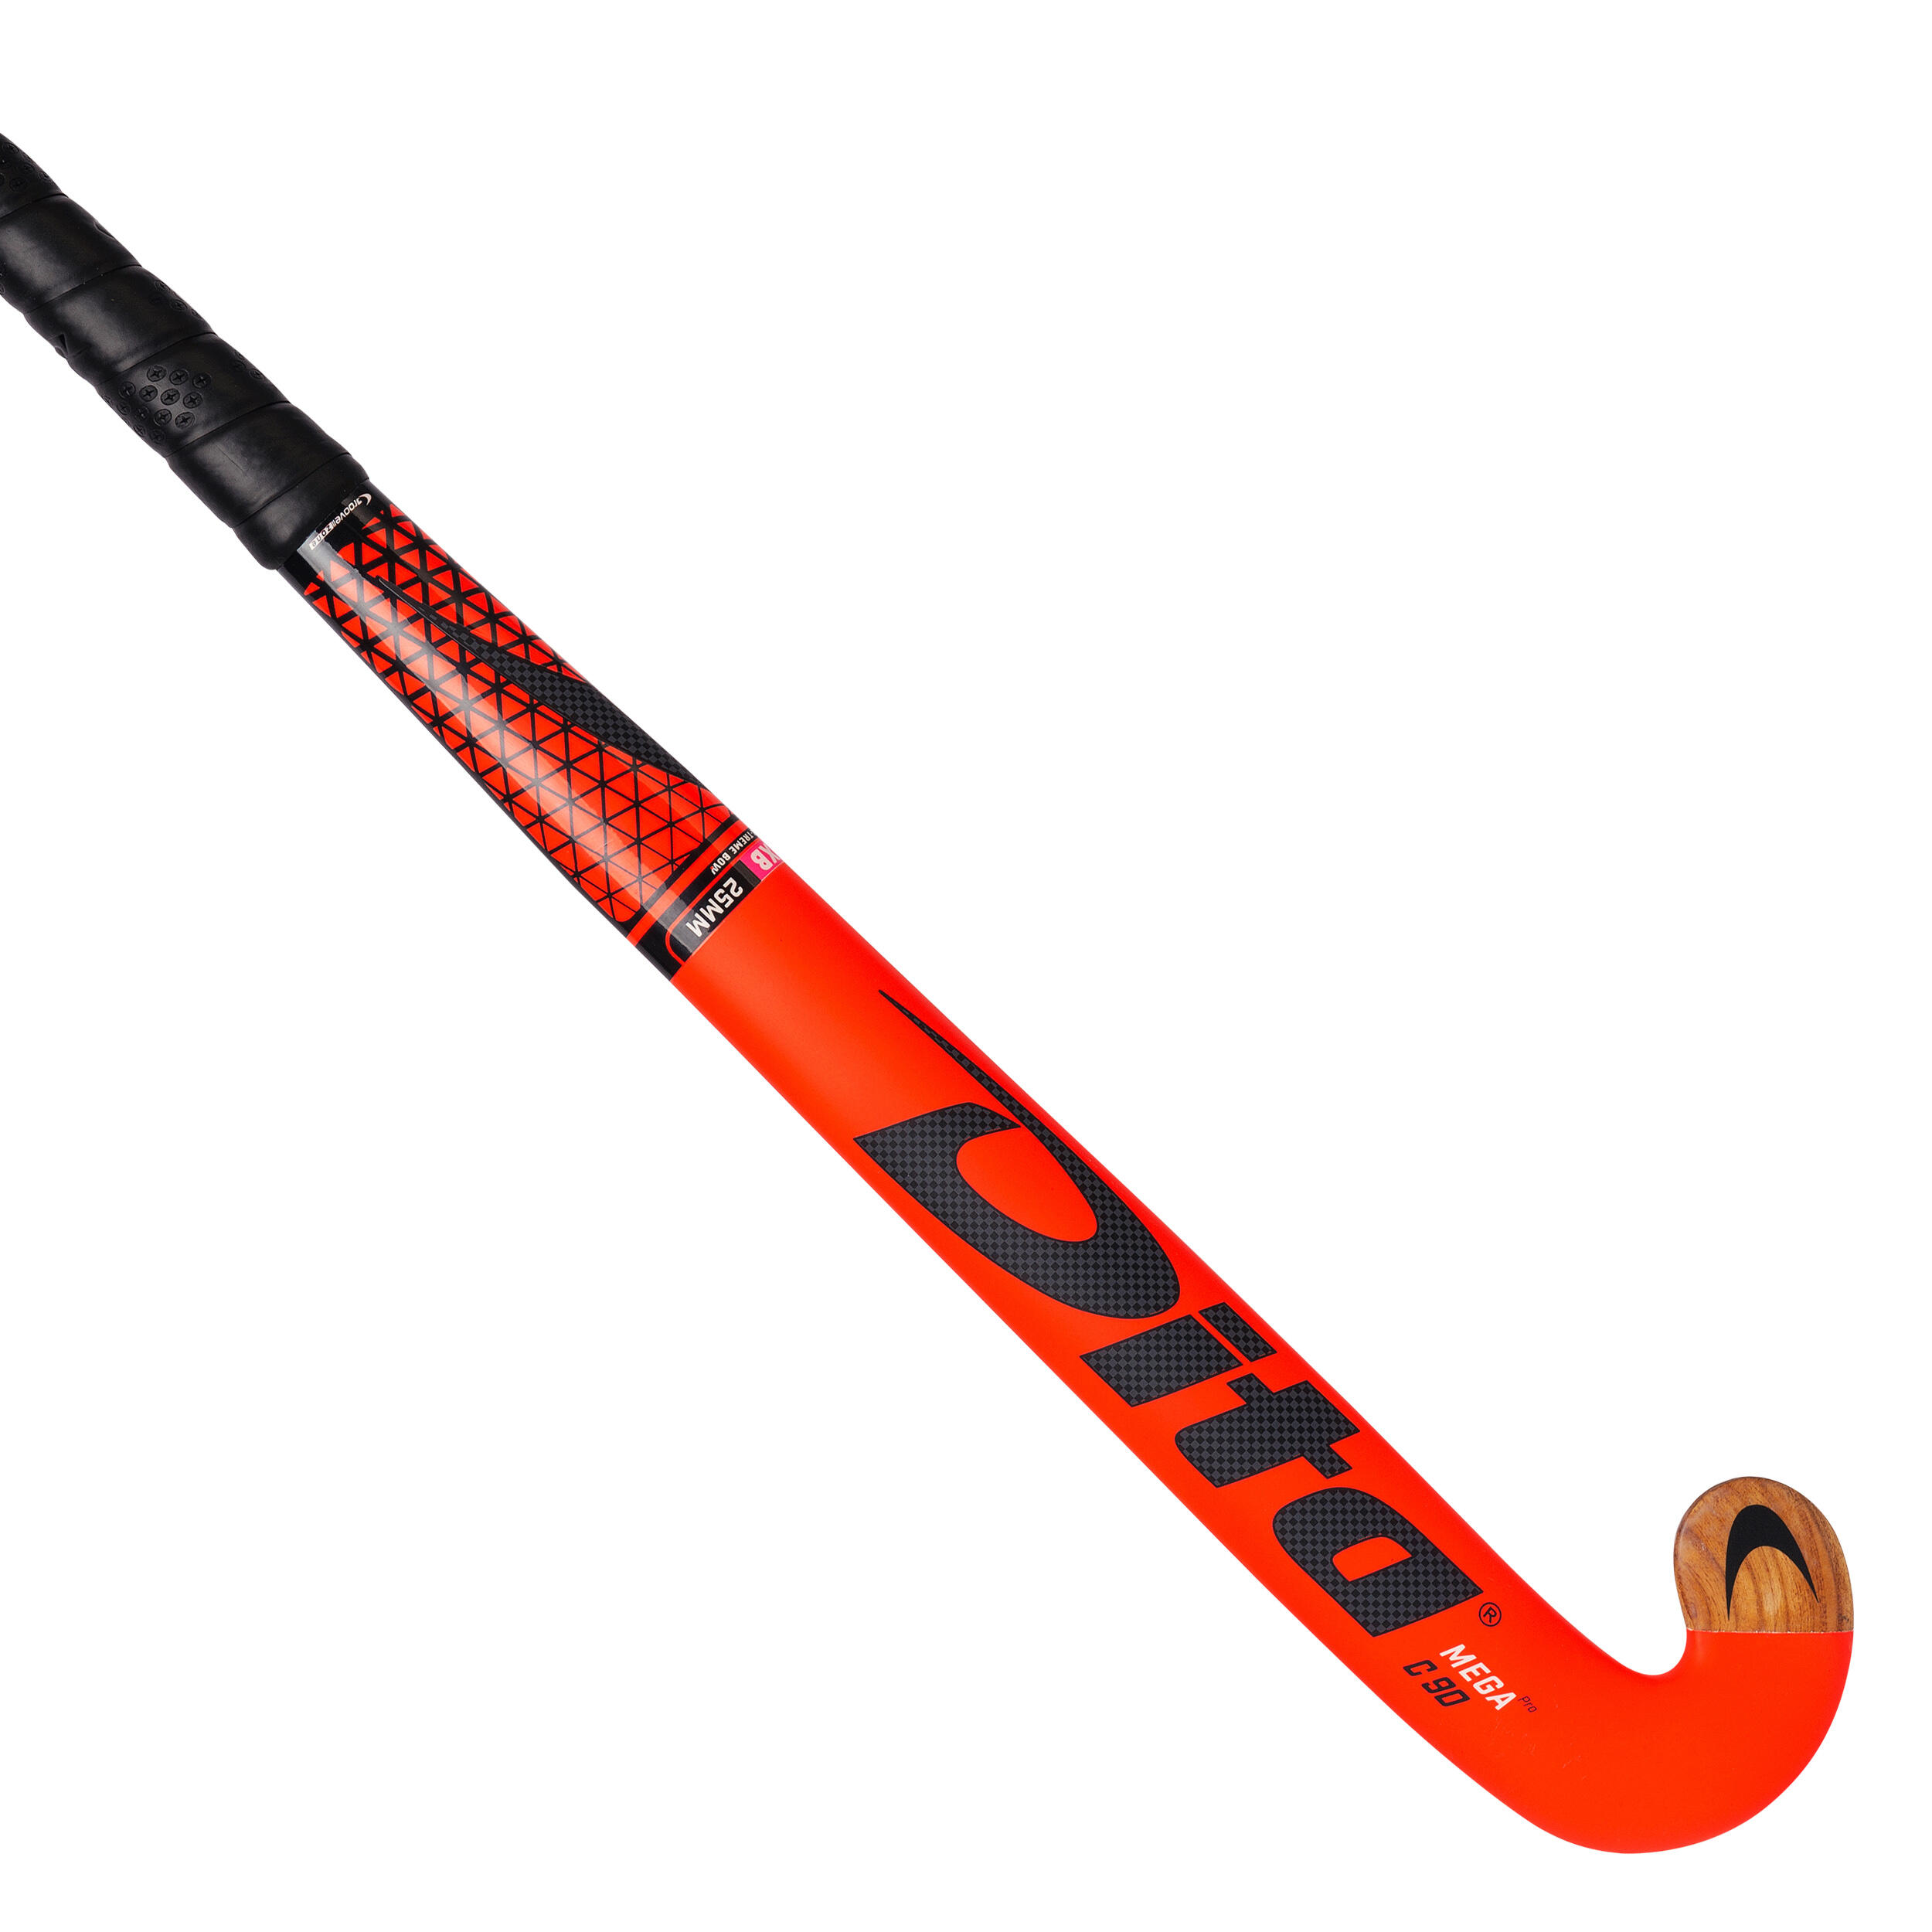 DITA Adult Extra Low Bow Indoor Stick Dita Megapro Wood C90 - Red